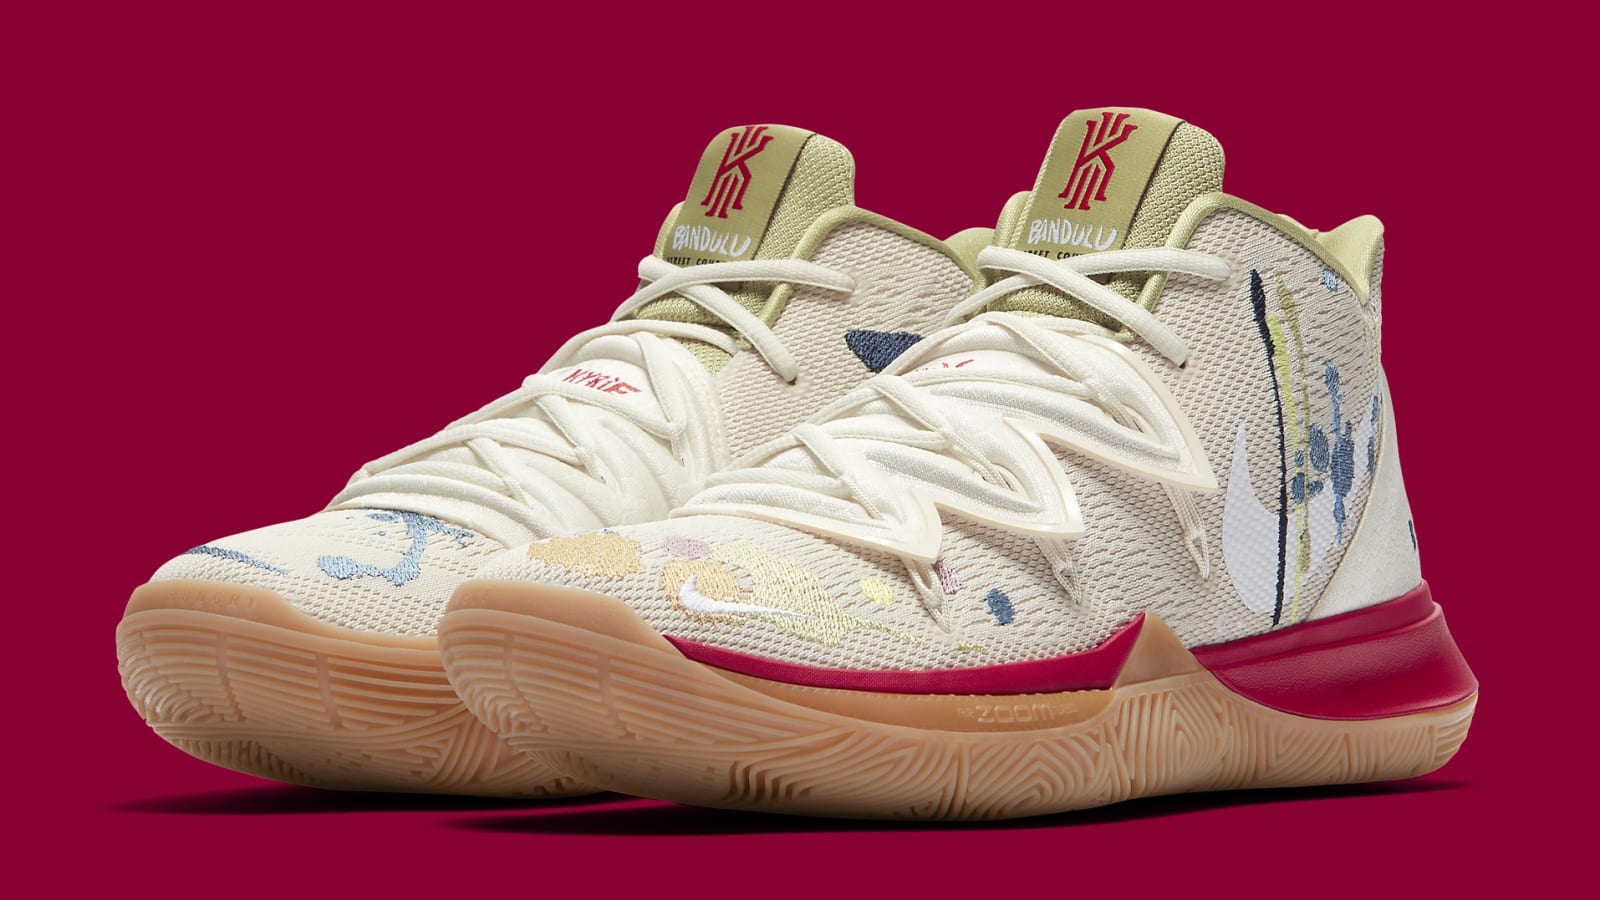 Bandulu x Nike Kyrie 5 Drops This Weekend: Official Details